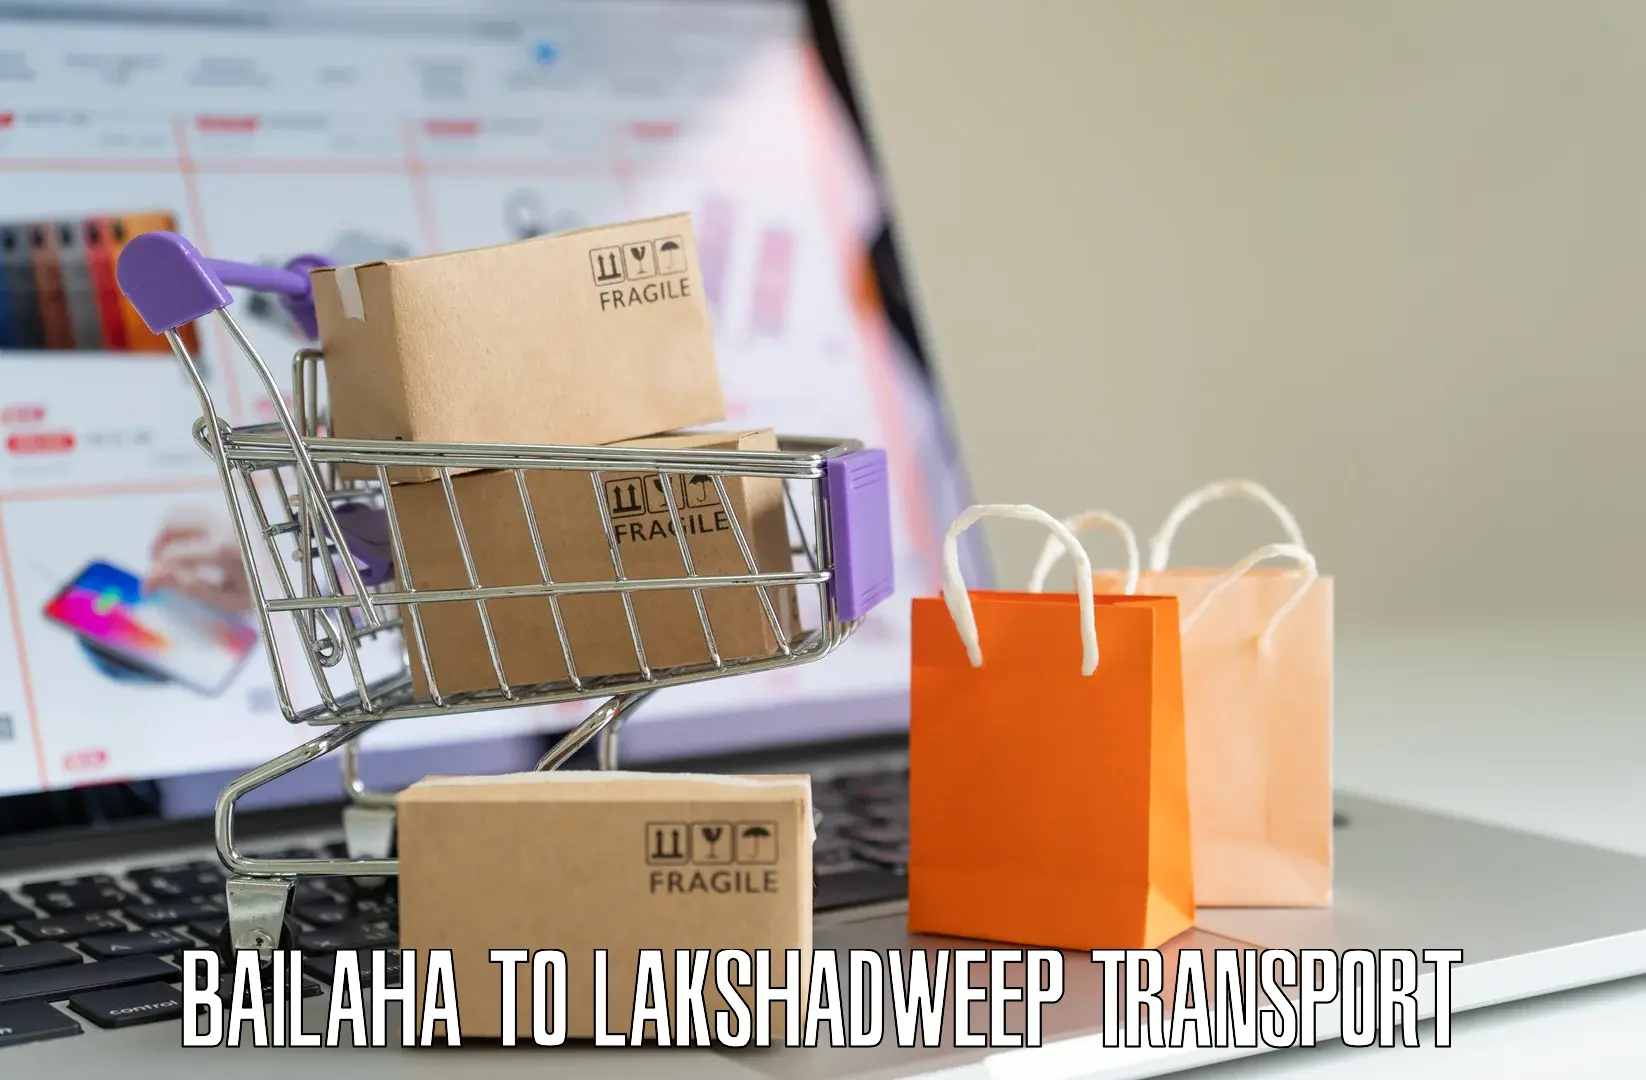 Delivery service Bailaha to Lakshadweep